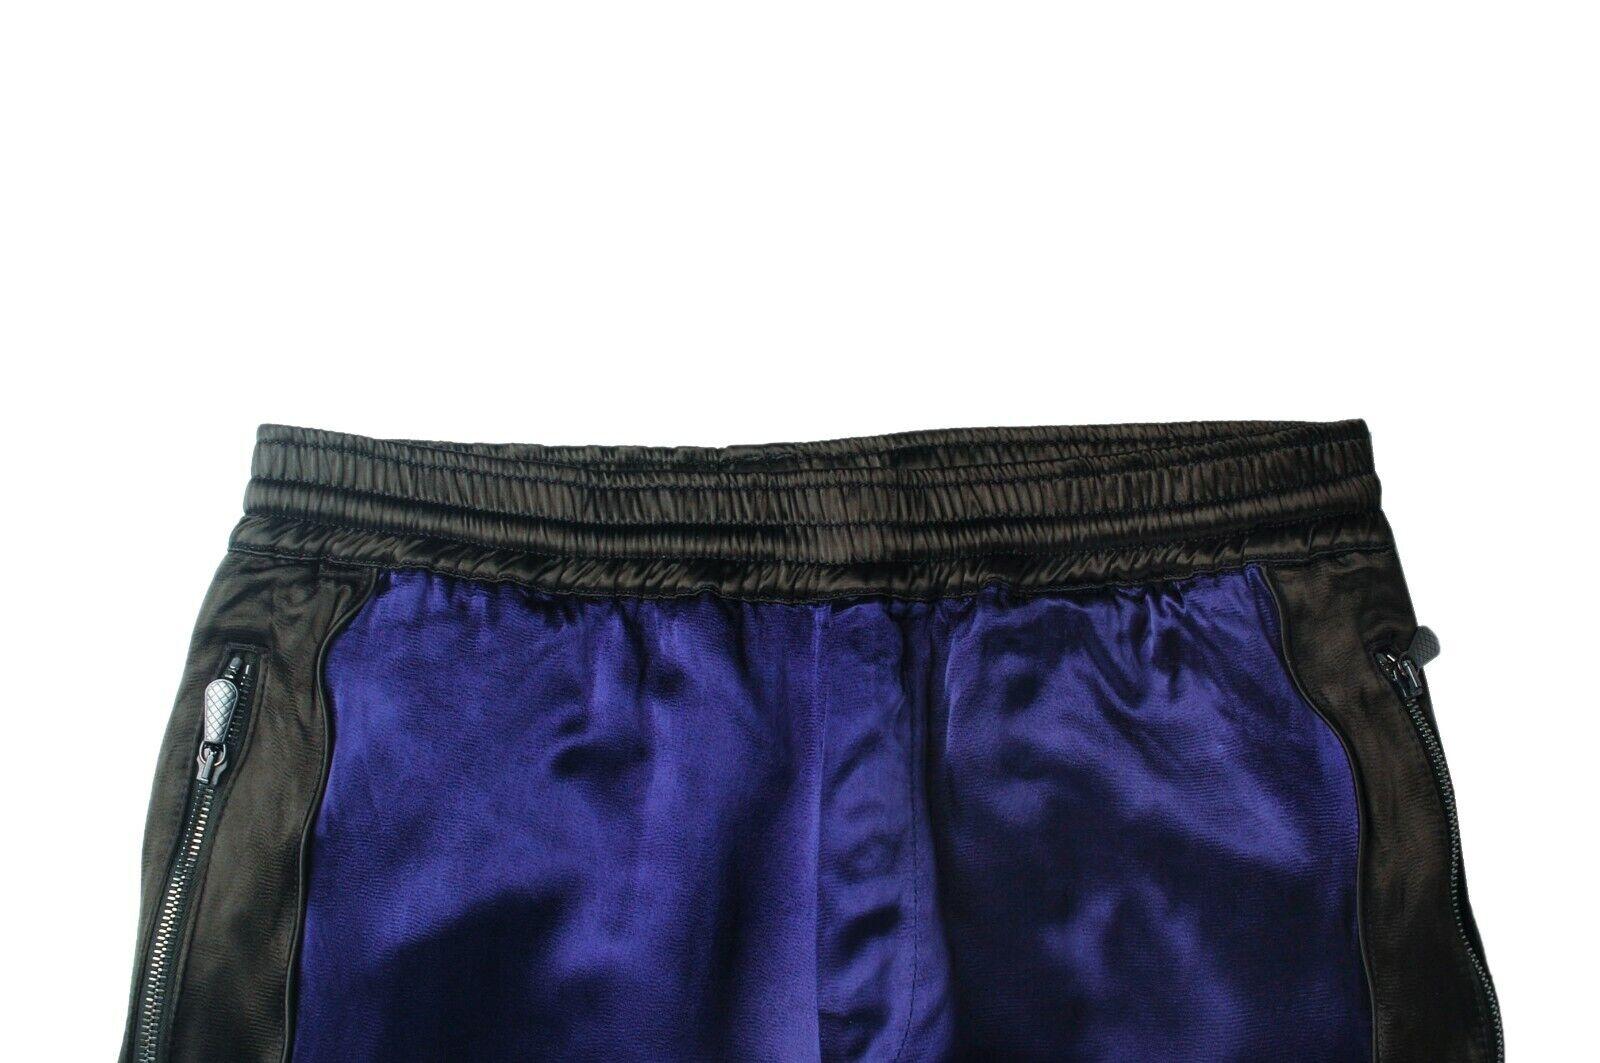 Item for sale is 100% genuine Bottega Veneta Shiny Zippers on Leg Openings Men Track Pants
Color: Dark Purple
(An actual color may a bit vary due to individual computer screen interpretation)
Material: 100% viscose (lining linen and cotton)
Tag